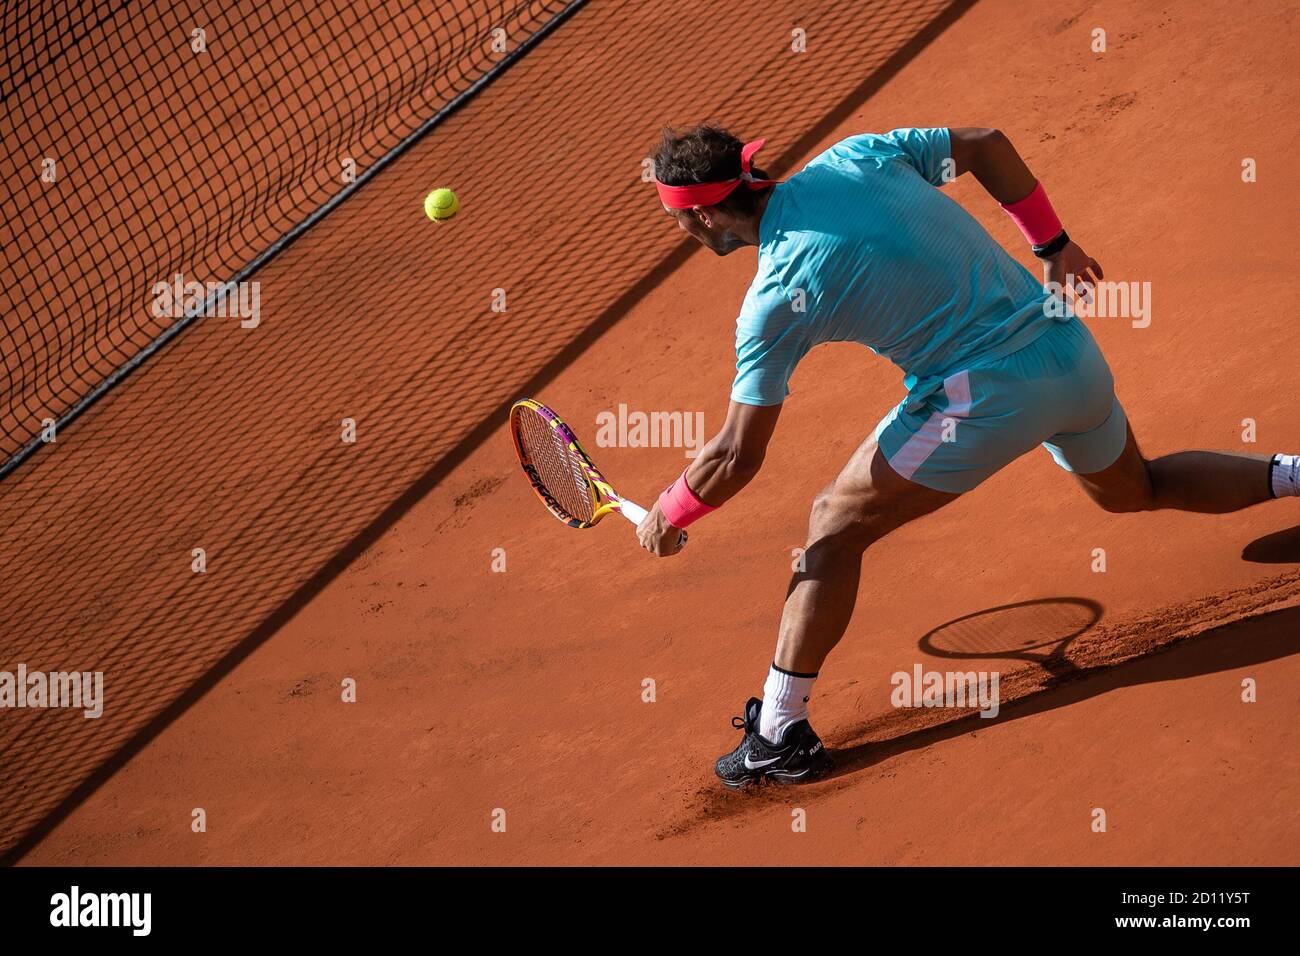 Paris, France. 4th Oct, 2020. Rafael Nadal hits a return during the men's singles 4th round match between Rafael Nadal of Spain and Sebastian Korda of the United States at the French Open tennis tournament 2020 at Roland Garros in Paris, France, Oct. 4, 2020. Credit: Aurelien Morissard/Xinhua/Alamy Live News Stock Photo